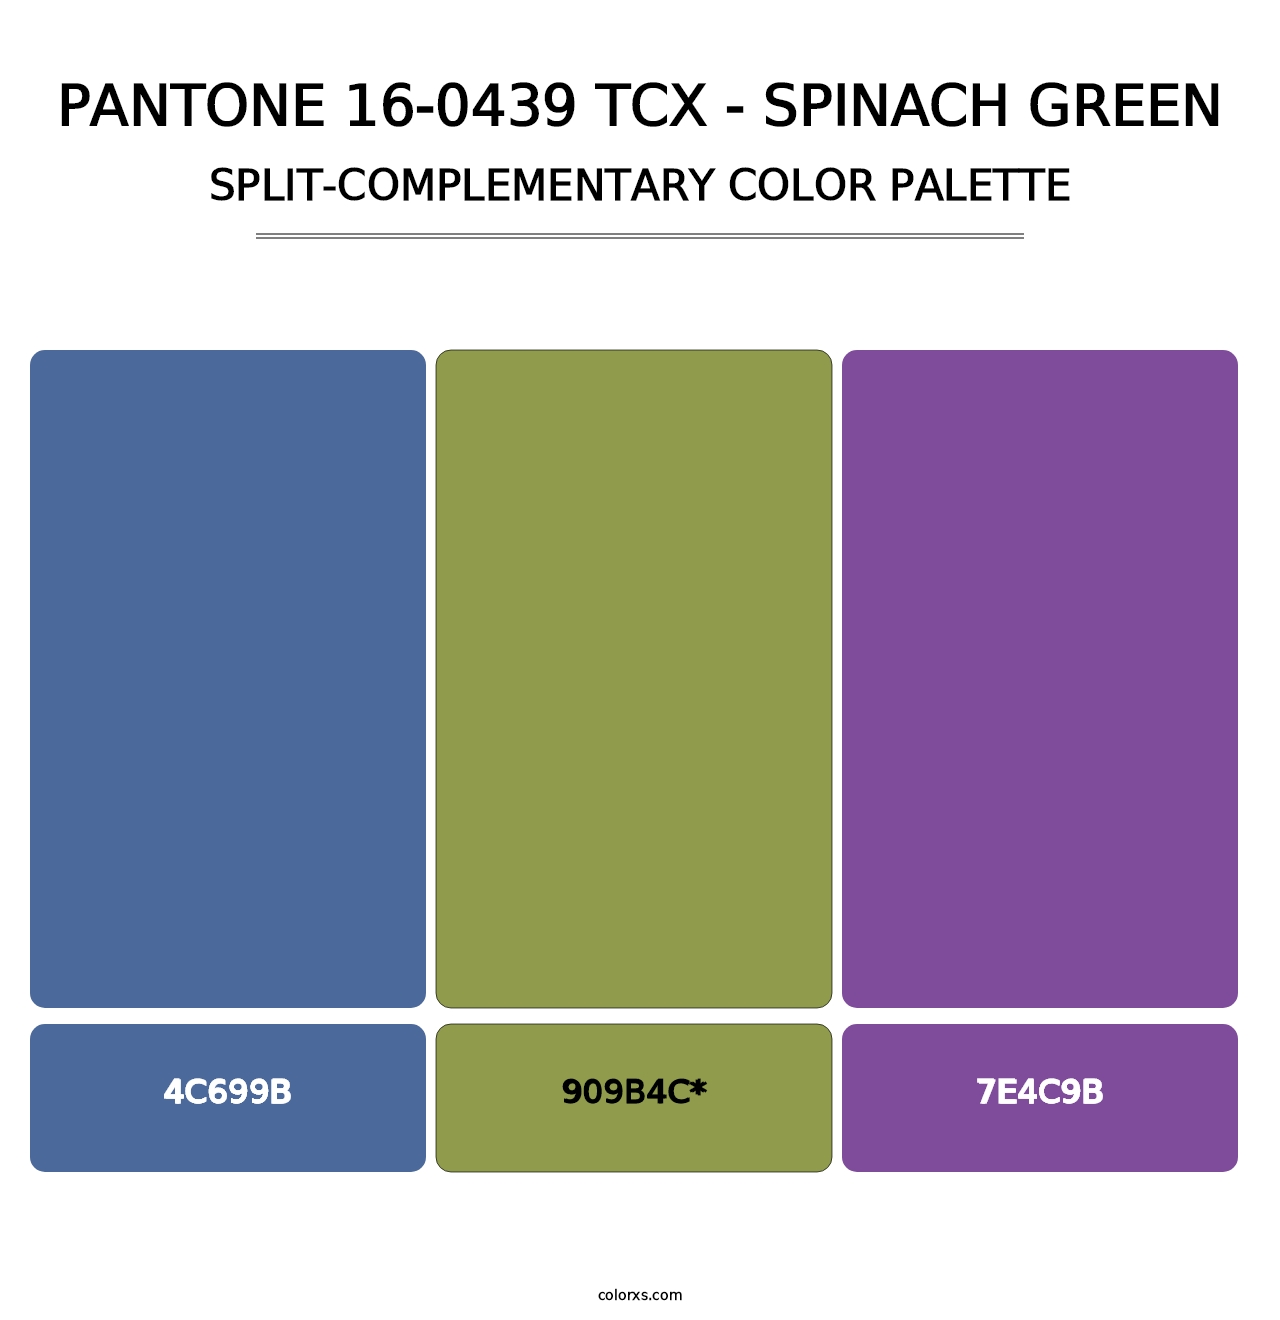 PANTONE 16-0439 TCX - Spinach Green - Split-Complementary Color Palette